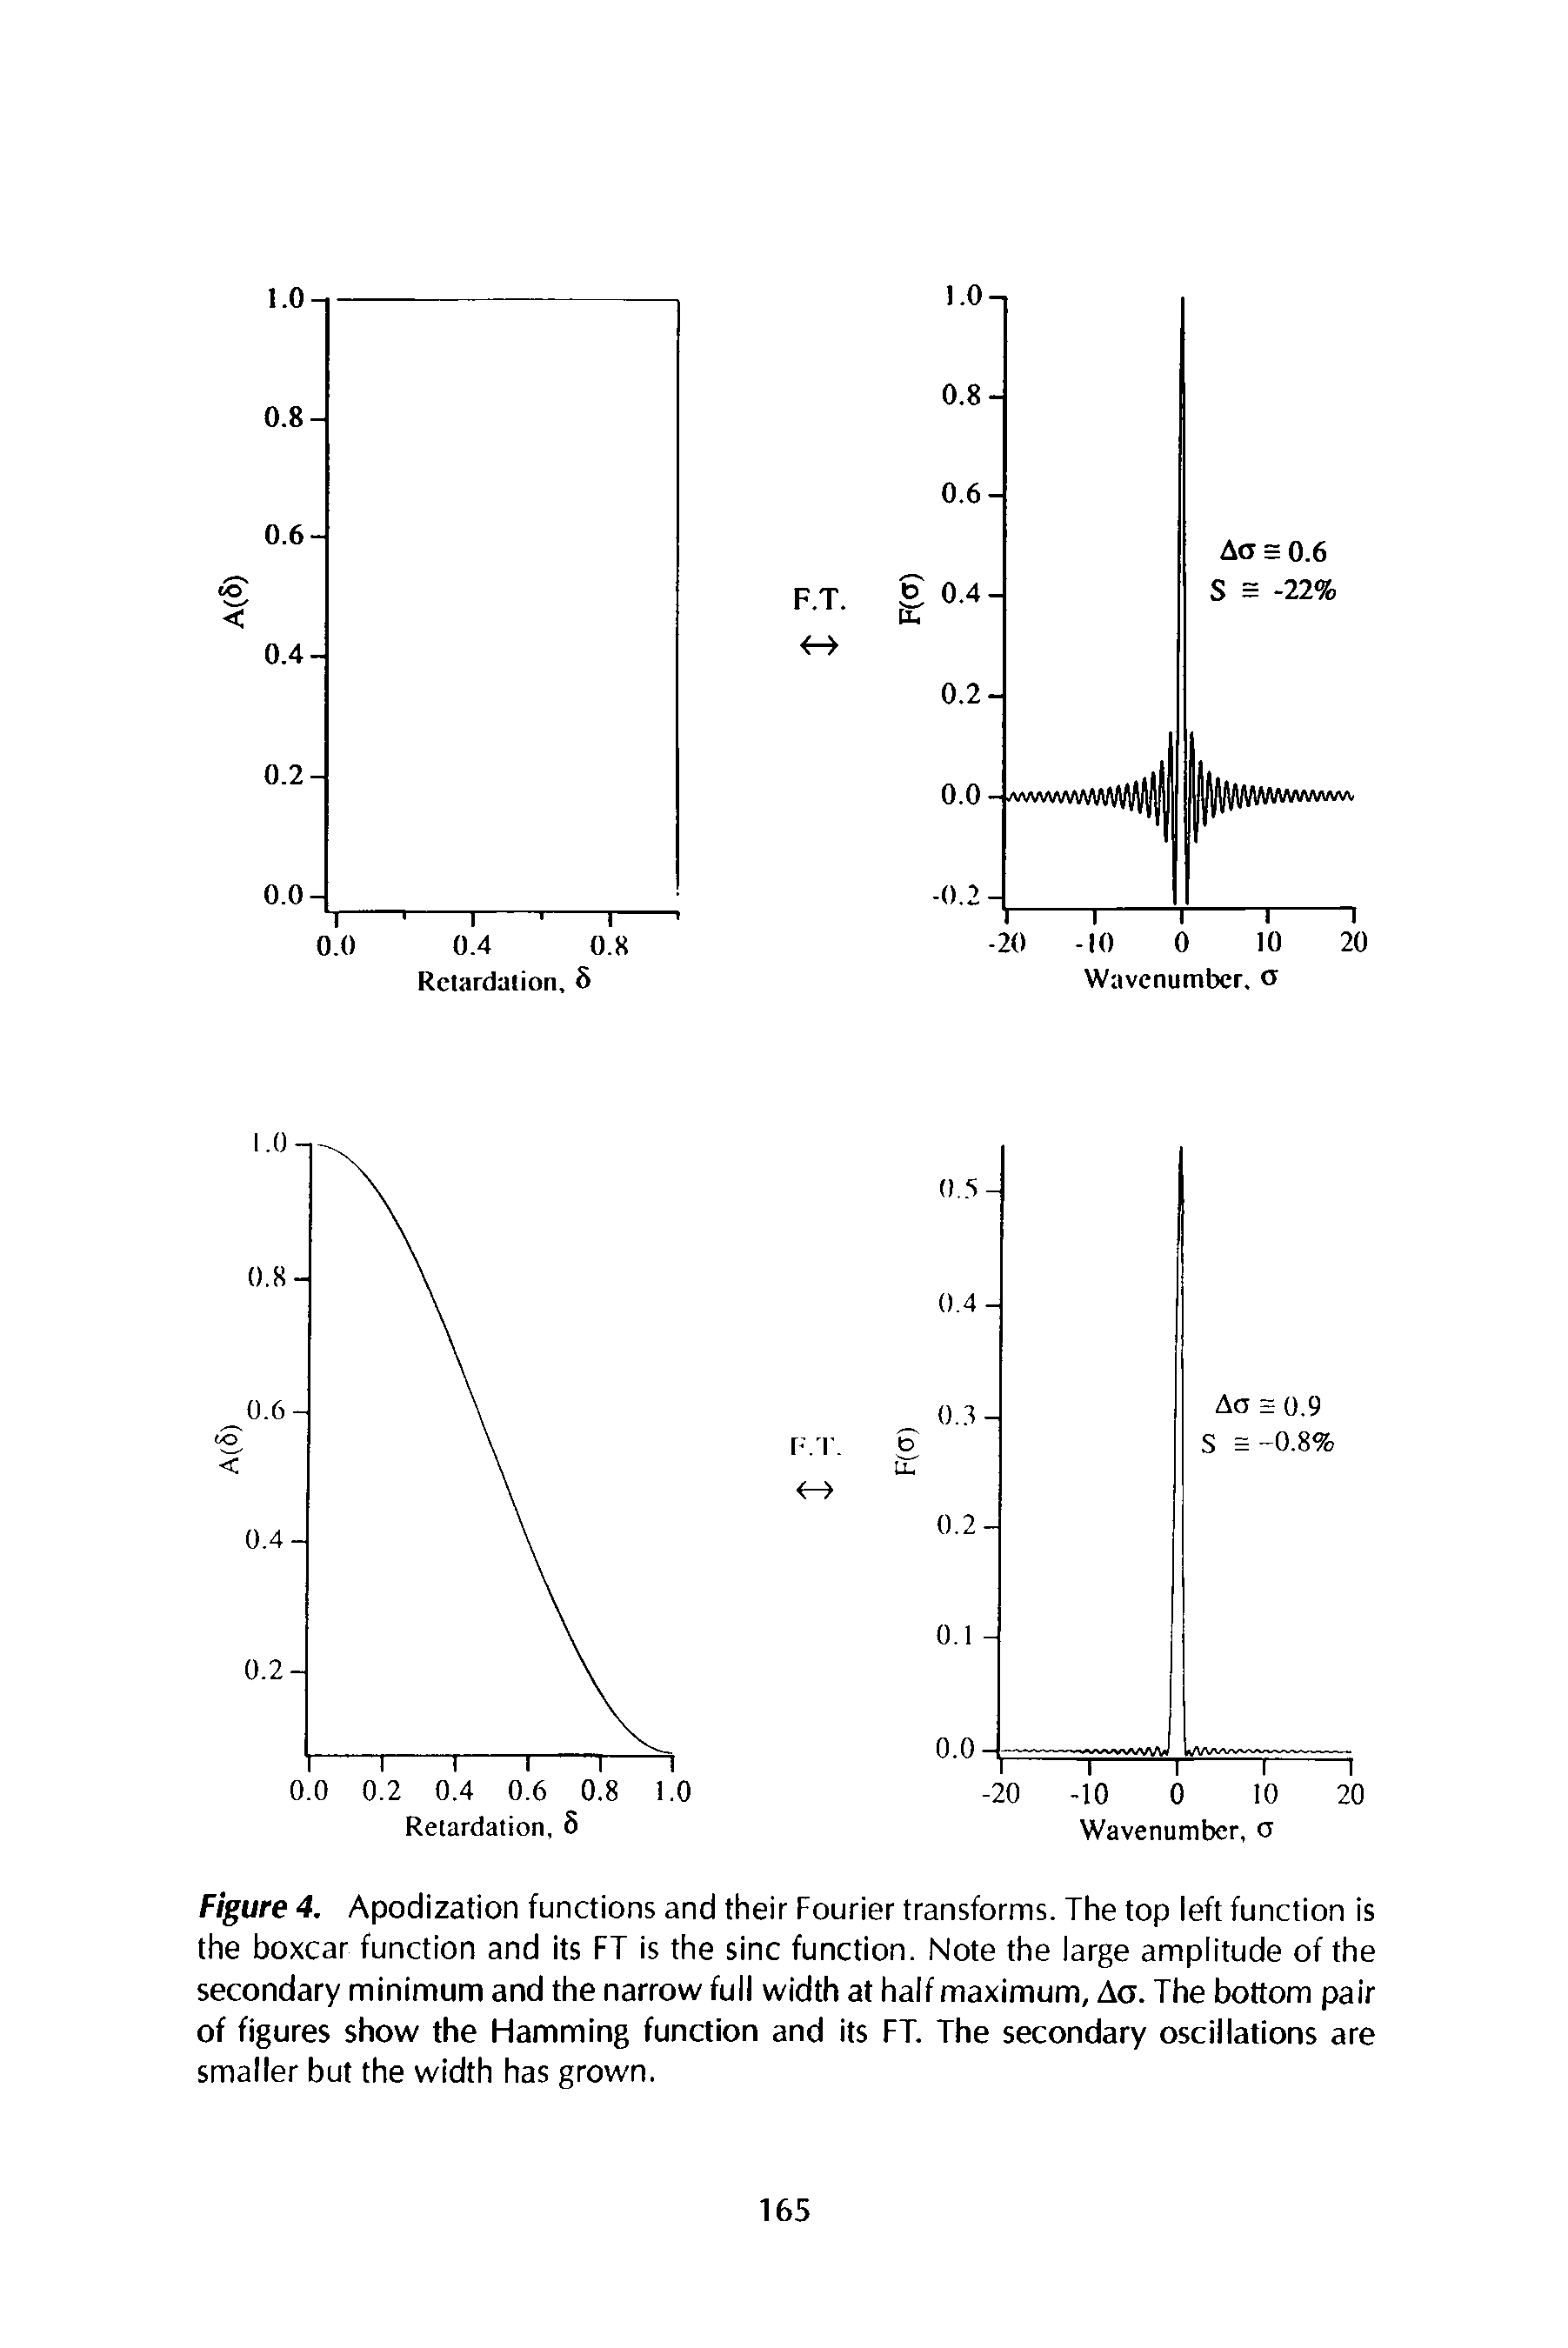 Figure 4. Apodization functions and their Fourier transforms. The top left function is the boxcar function and its FT is the sine function. Note the large amplitude of the secondary minimum and the narrow full width at half maximum, Ao. The bottom pair of figures show the Hamming function and its FT. The secondary oscillations are smaller but the width has grown.